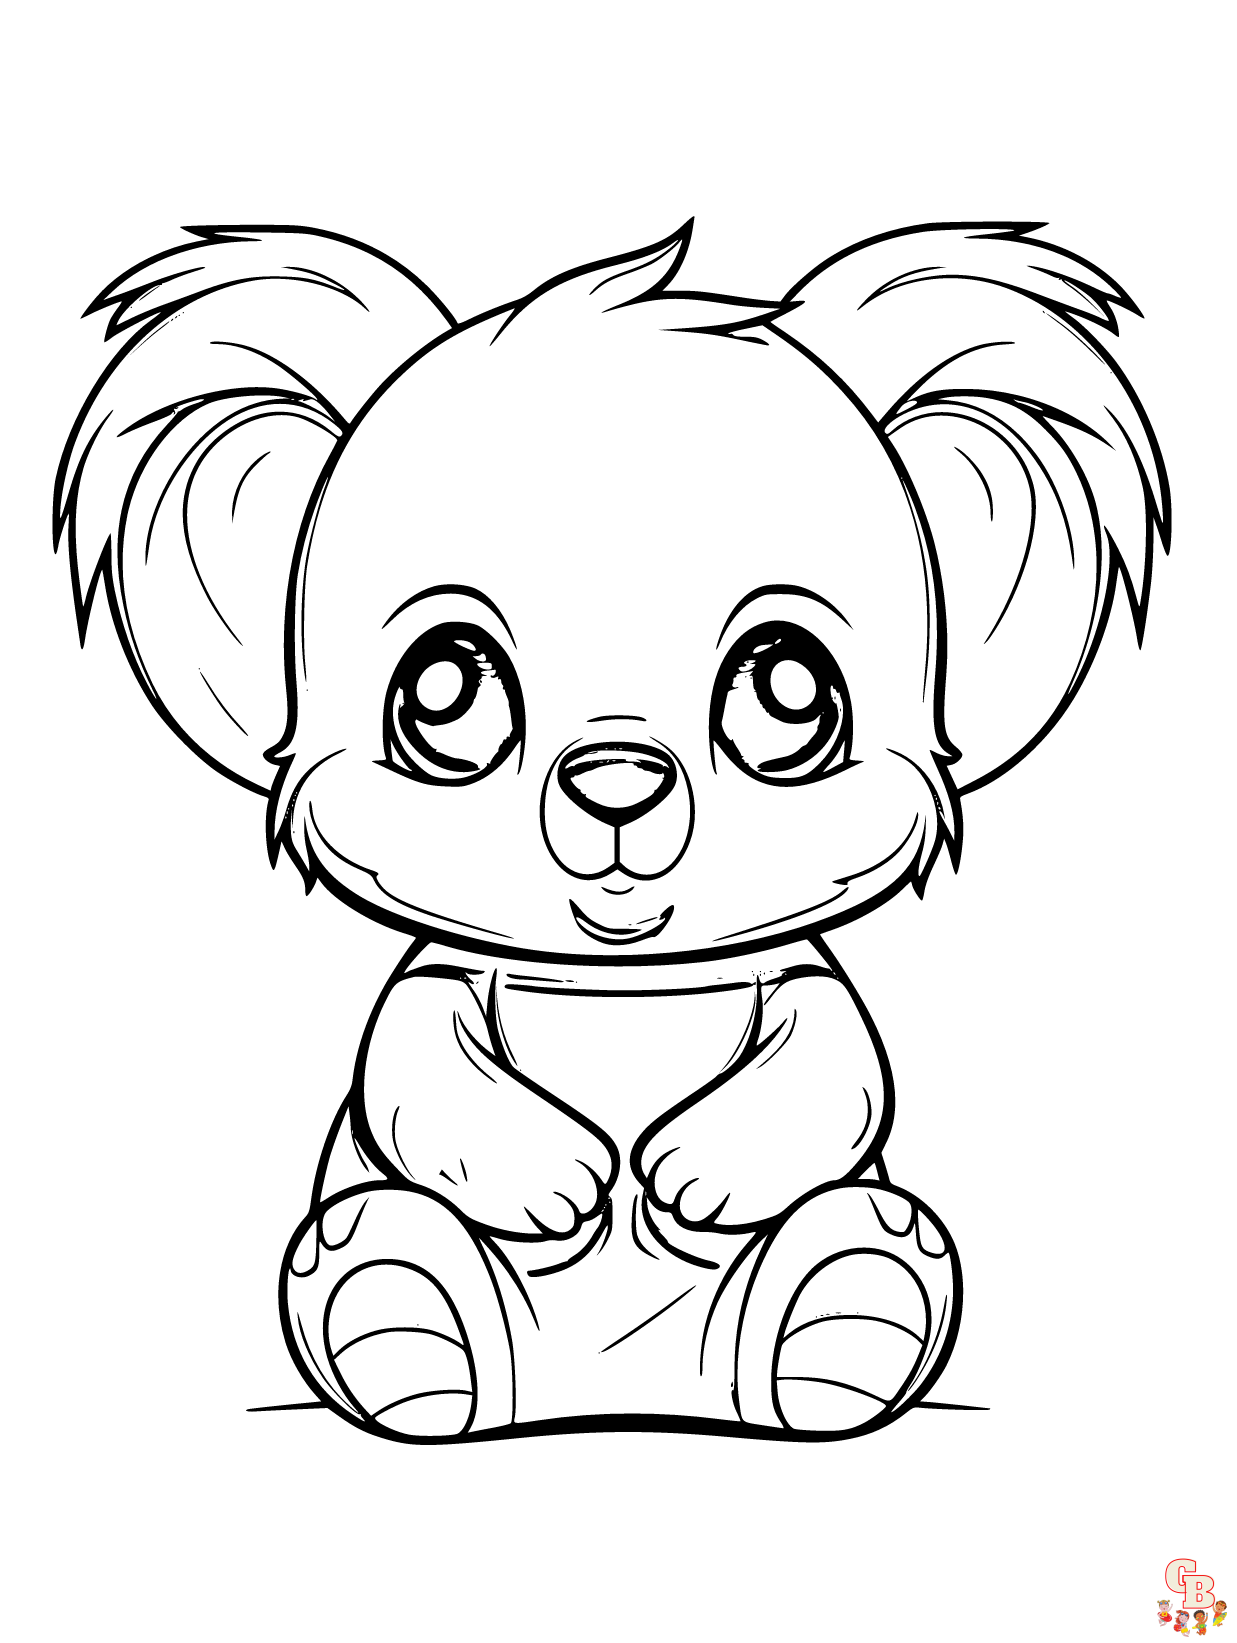 Koala coloring pages to print